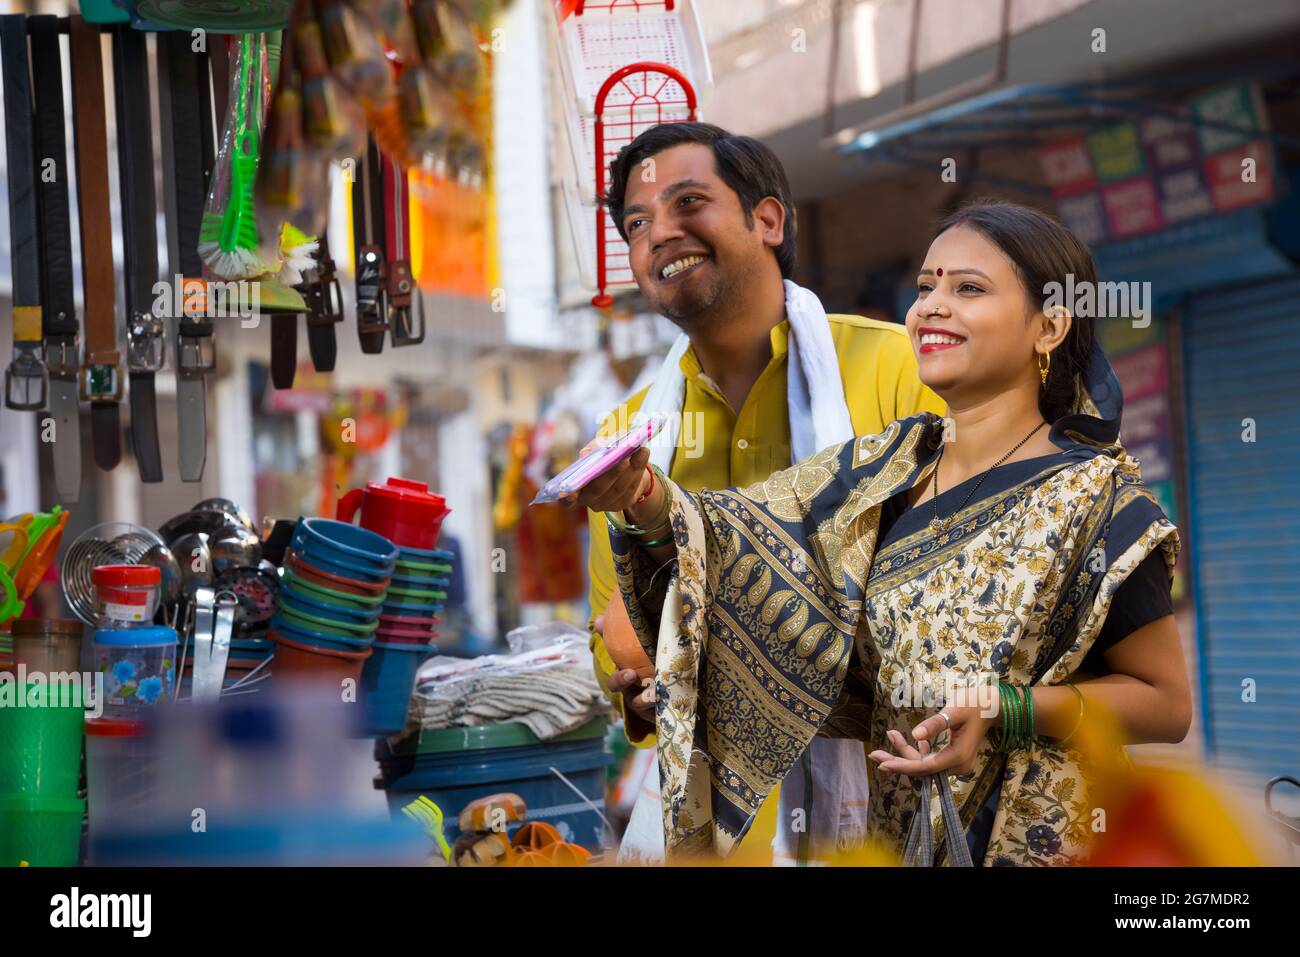 A RURAL HUSBAND AND WIFE HAPPILY SHOPPING TOGETHER FOR HOUSEHOLD ITEMS Stock Photo